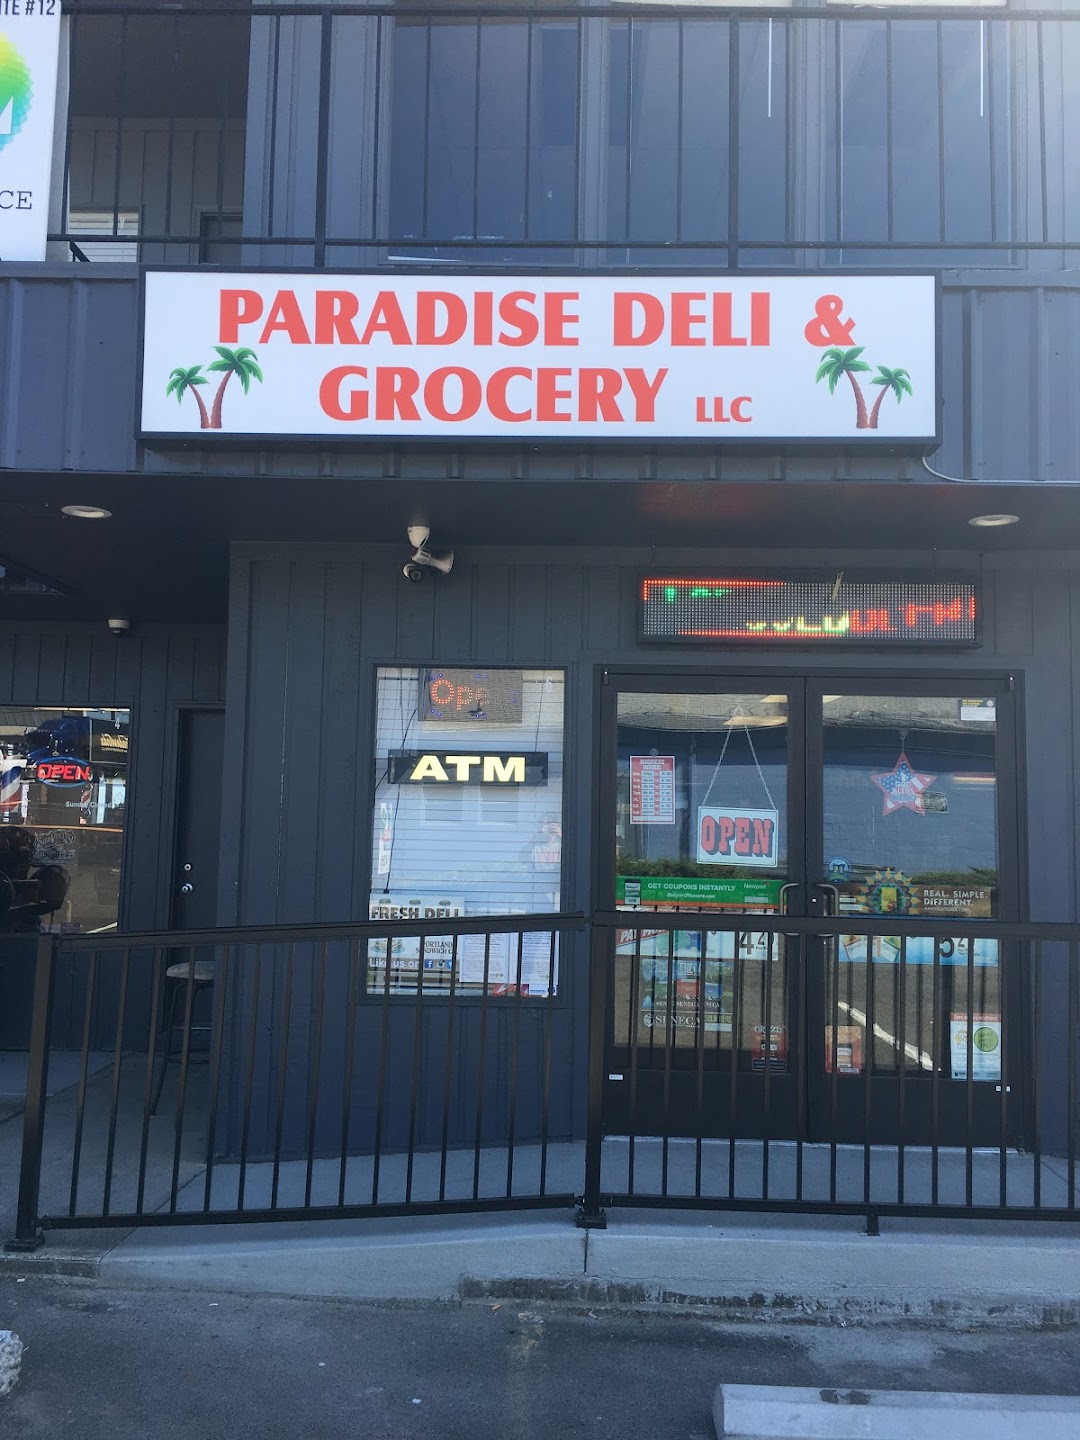 Paradise Deli and Grocery LLC